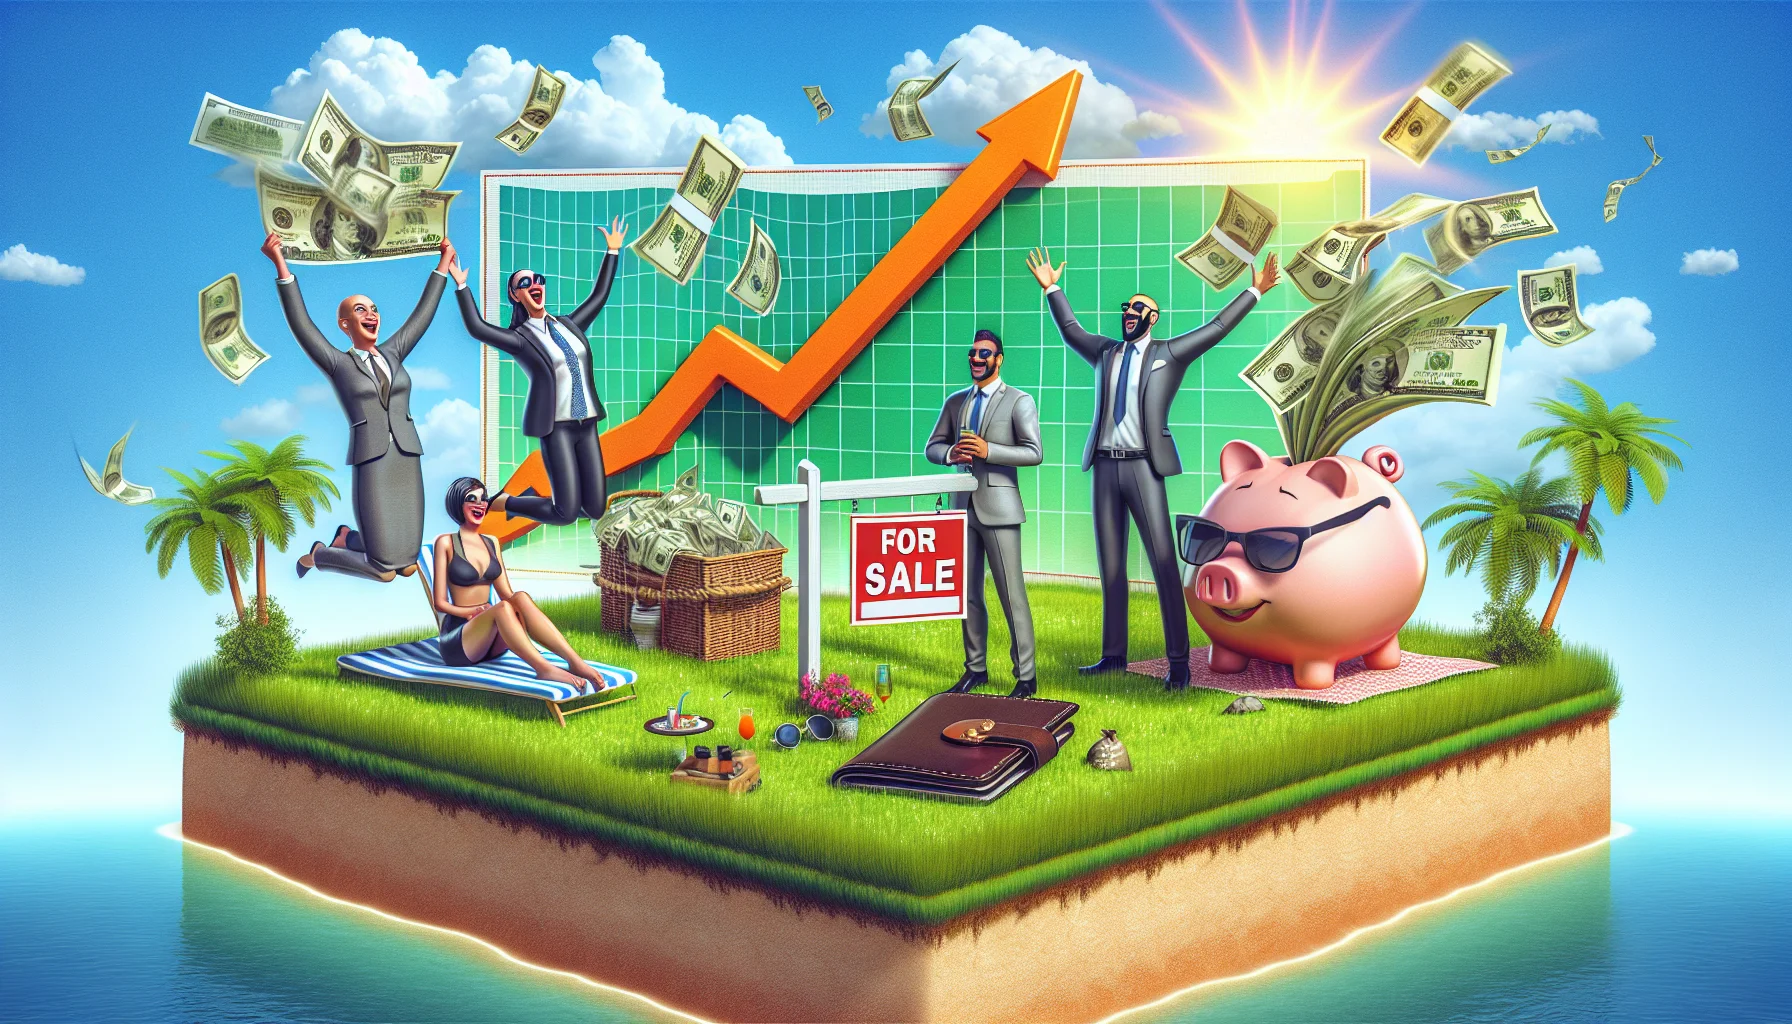 Visualize a humorous and realistic scenario presenting an ideal situation for investing in real estate. The image begins with a lush, expansive piece of land marked with a 'For Sale' sign beneath a perfect climate of sunny skies. To the left, an animated graph pointing upwards indicates the lucrative future value of the land. Nearby, a couple of people, one Middle-Eastern woman and one Caucasian man, both dressed in business attire are gleefully leaping in the air, clapping their hands above their heads. There's a giant wallet overflowing with cash in the background representing potential profits. Add in some humorous elements, such as a piggy bank seating on a sun lounger wearing sunglasses and sipping a cocktail, symbolizing the comfort and ease of this investment.